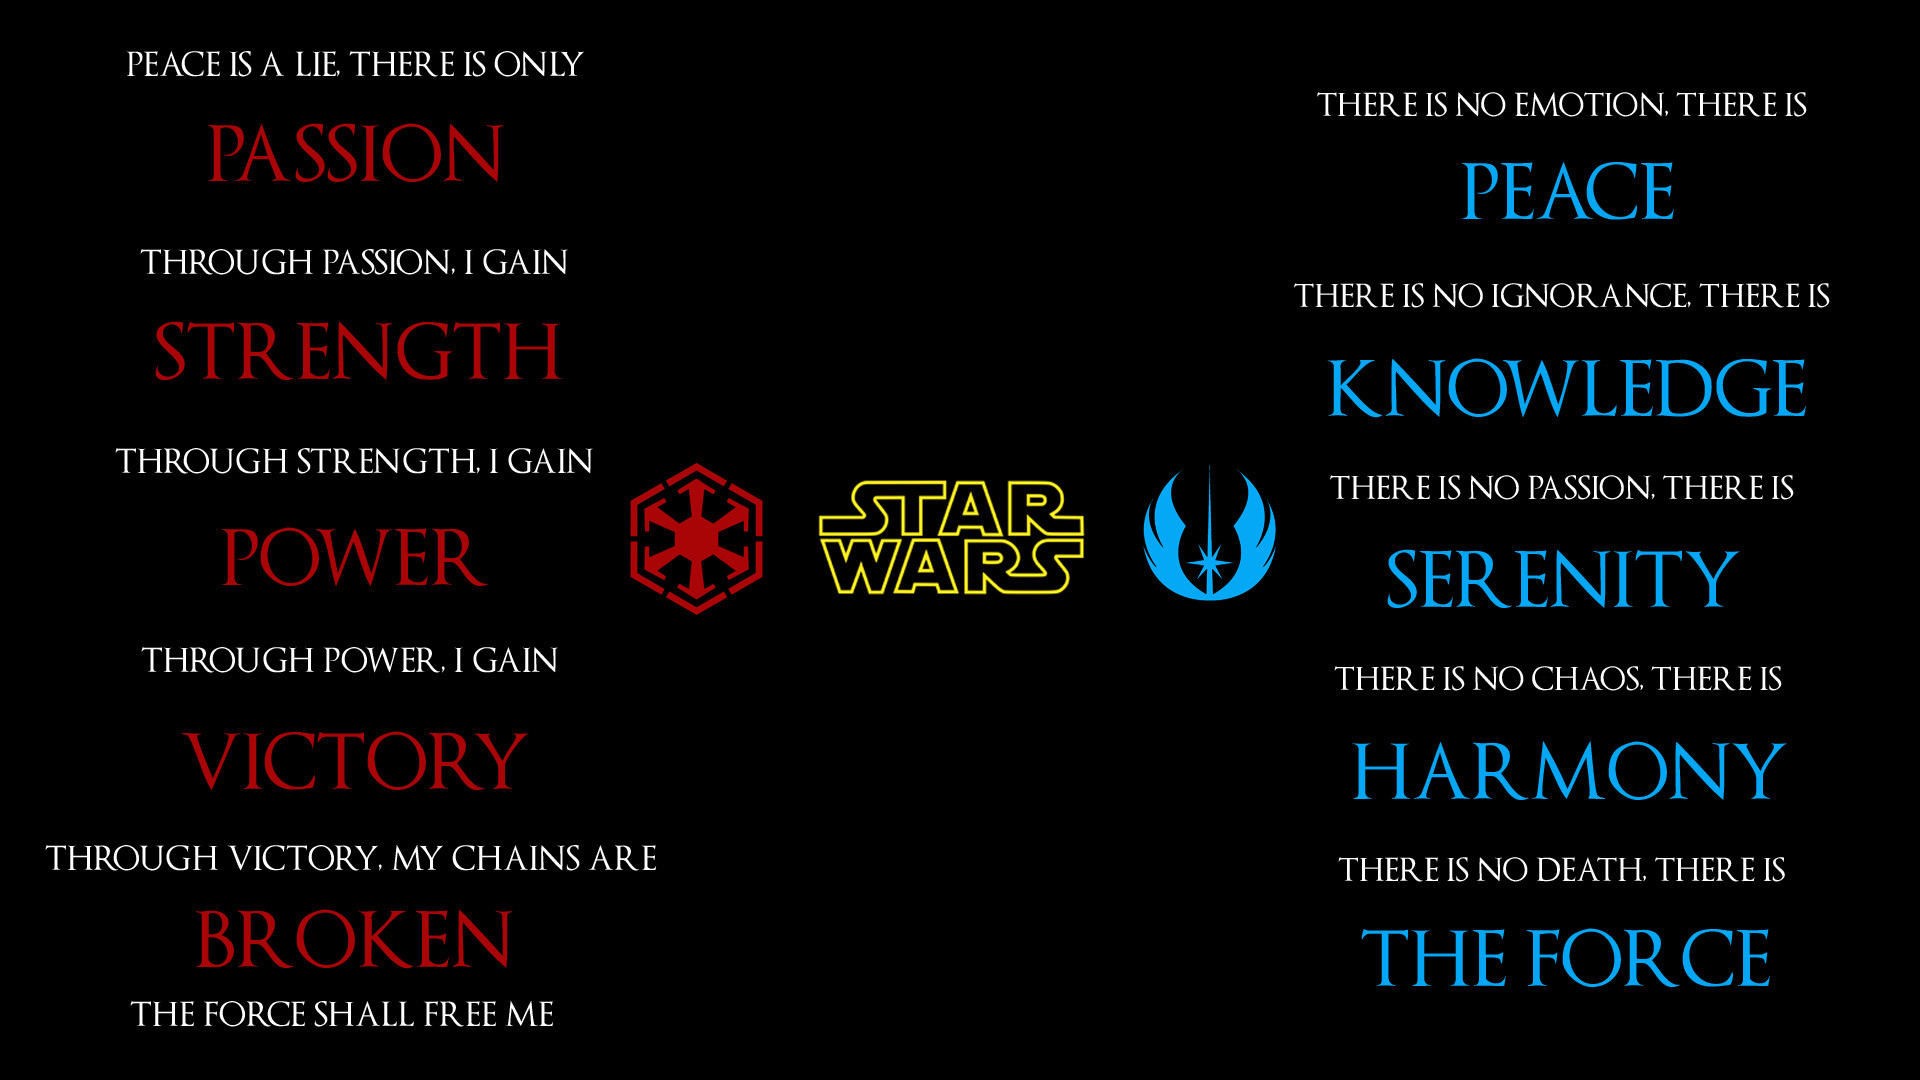 Variants for only Sith, or only Jedi: https://imgur.com/a/qBQGH Edited so  that "The Force" is highlighted in the Sith Code, Rather than "Broken" …